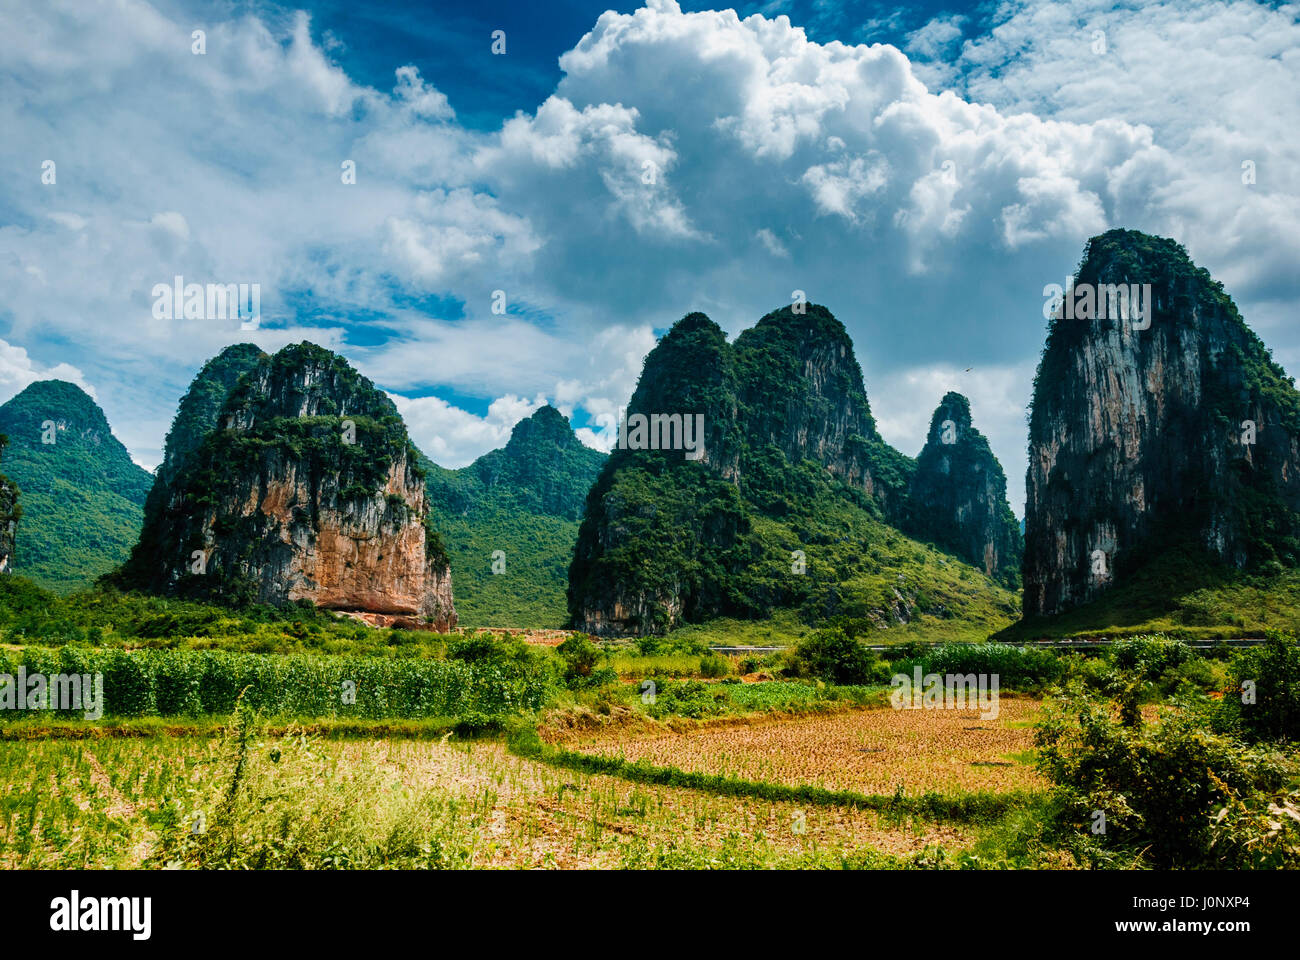 Karst mountains and countryside scenery Stock Photo